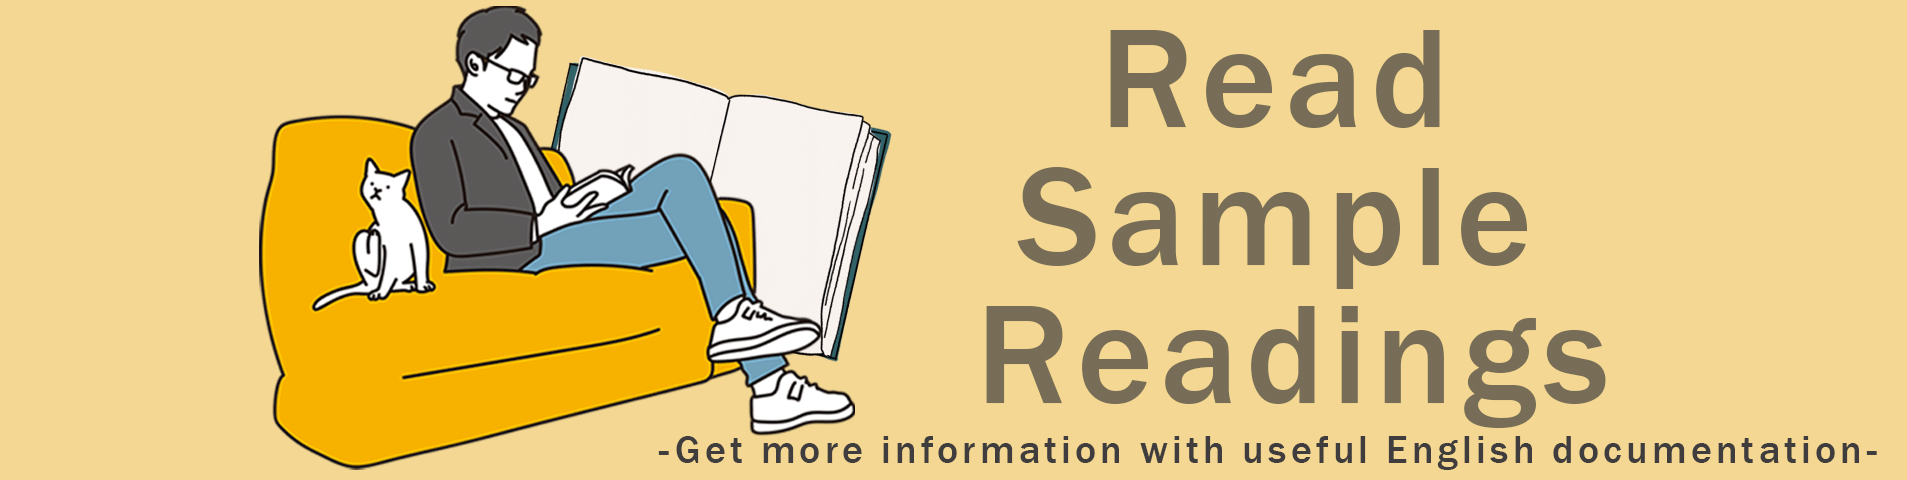 Read sample readings -Get more information with useful English documentation-